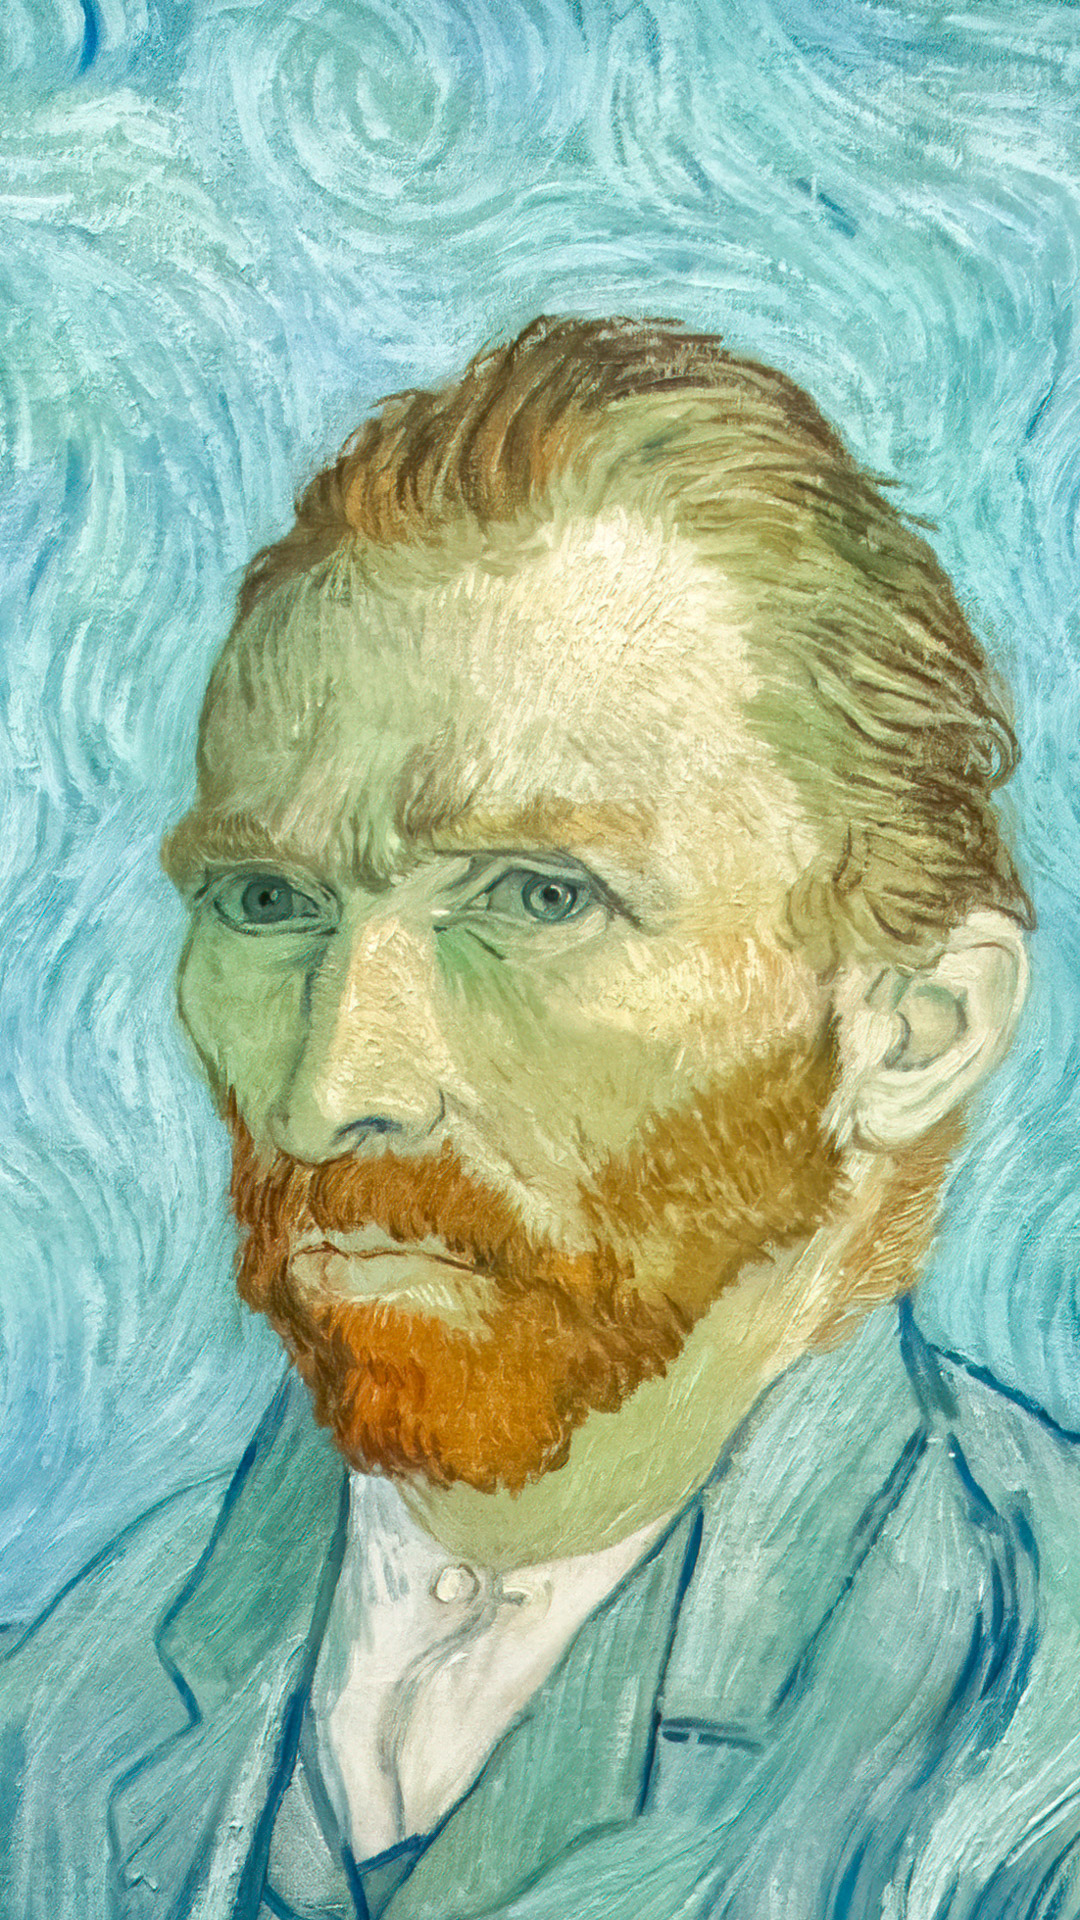 Self Portrait iOS wallpaper brings Van Gogh's introspective gaze to life on your device, a high-res download embodying the artist's self-reflection.